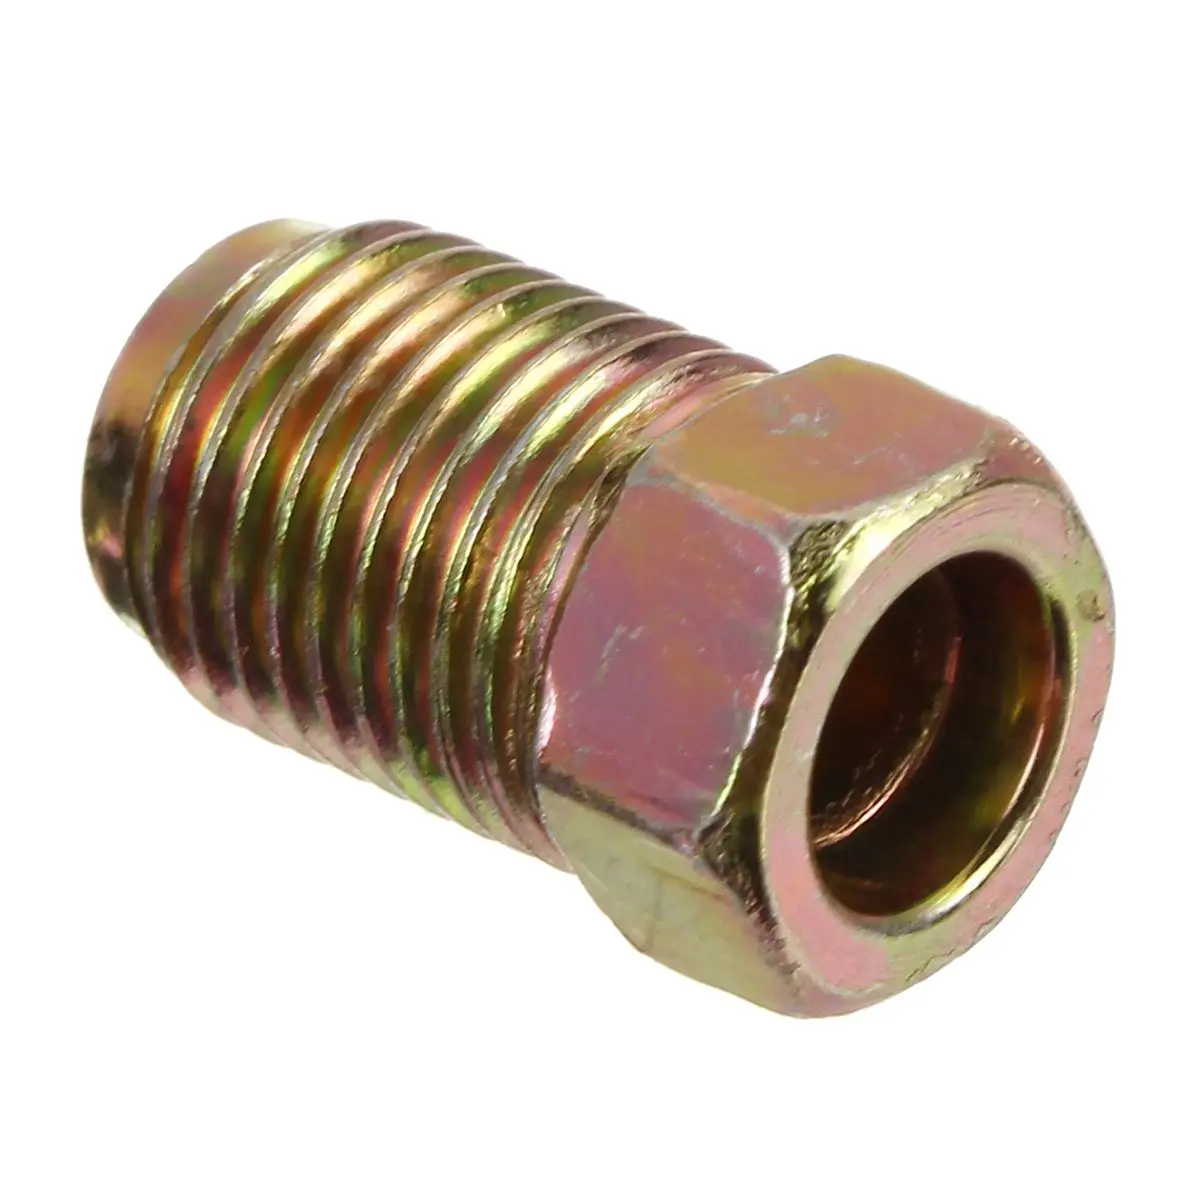 25 and 50's Brake Unions 12 x 1 mm Part Thread Male 4 10 